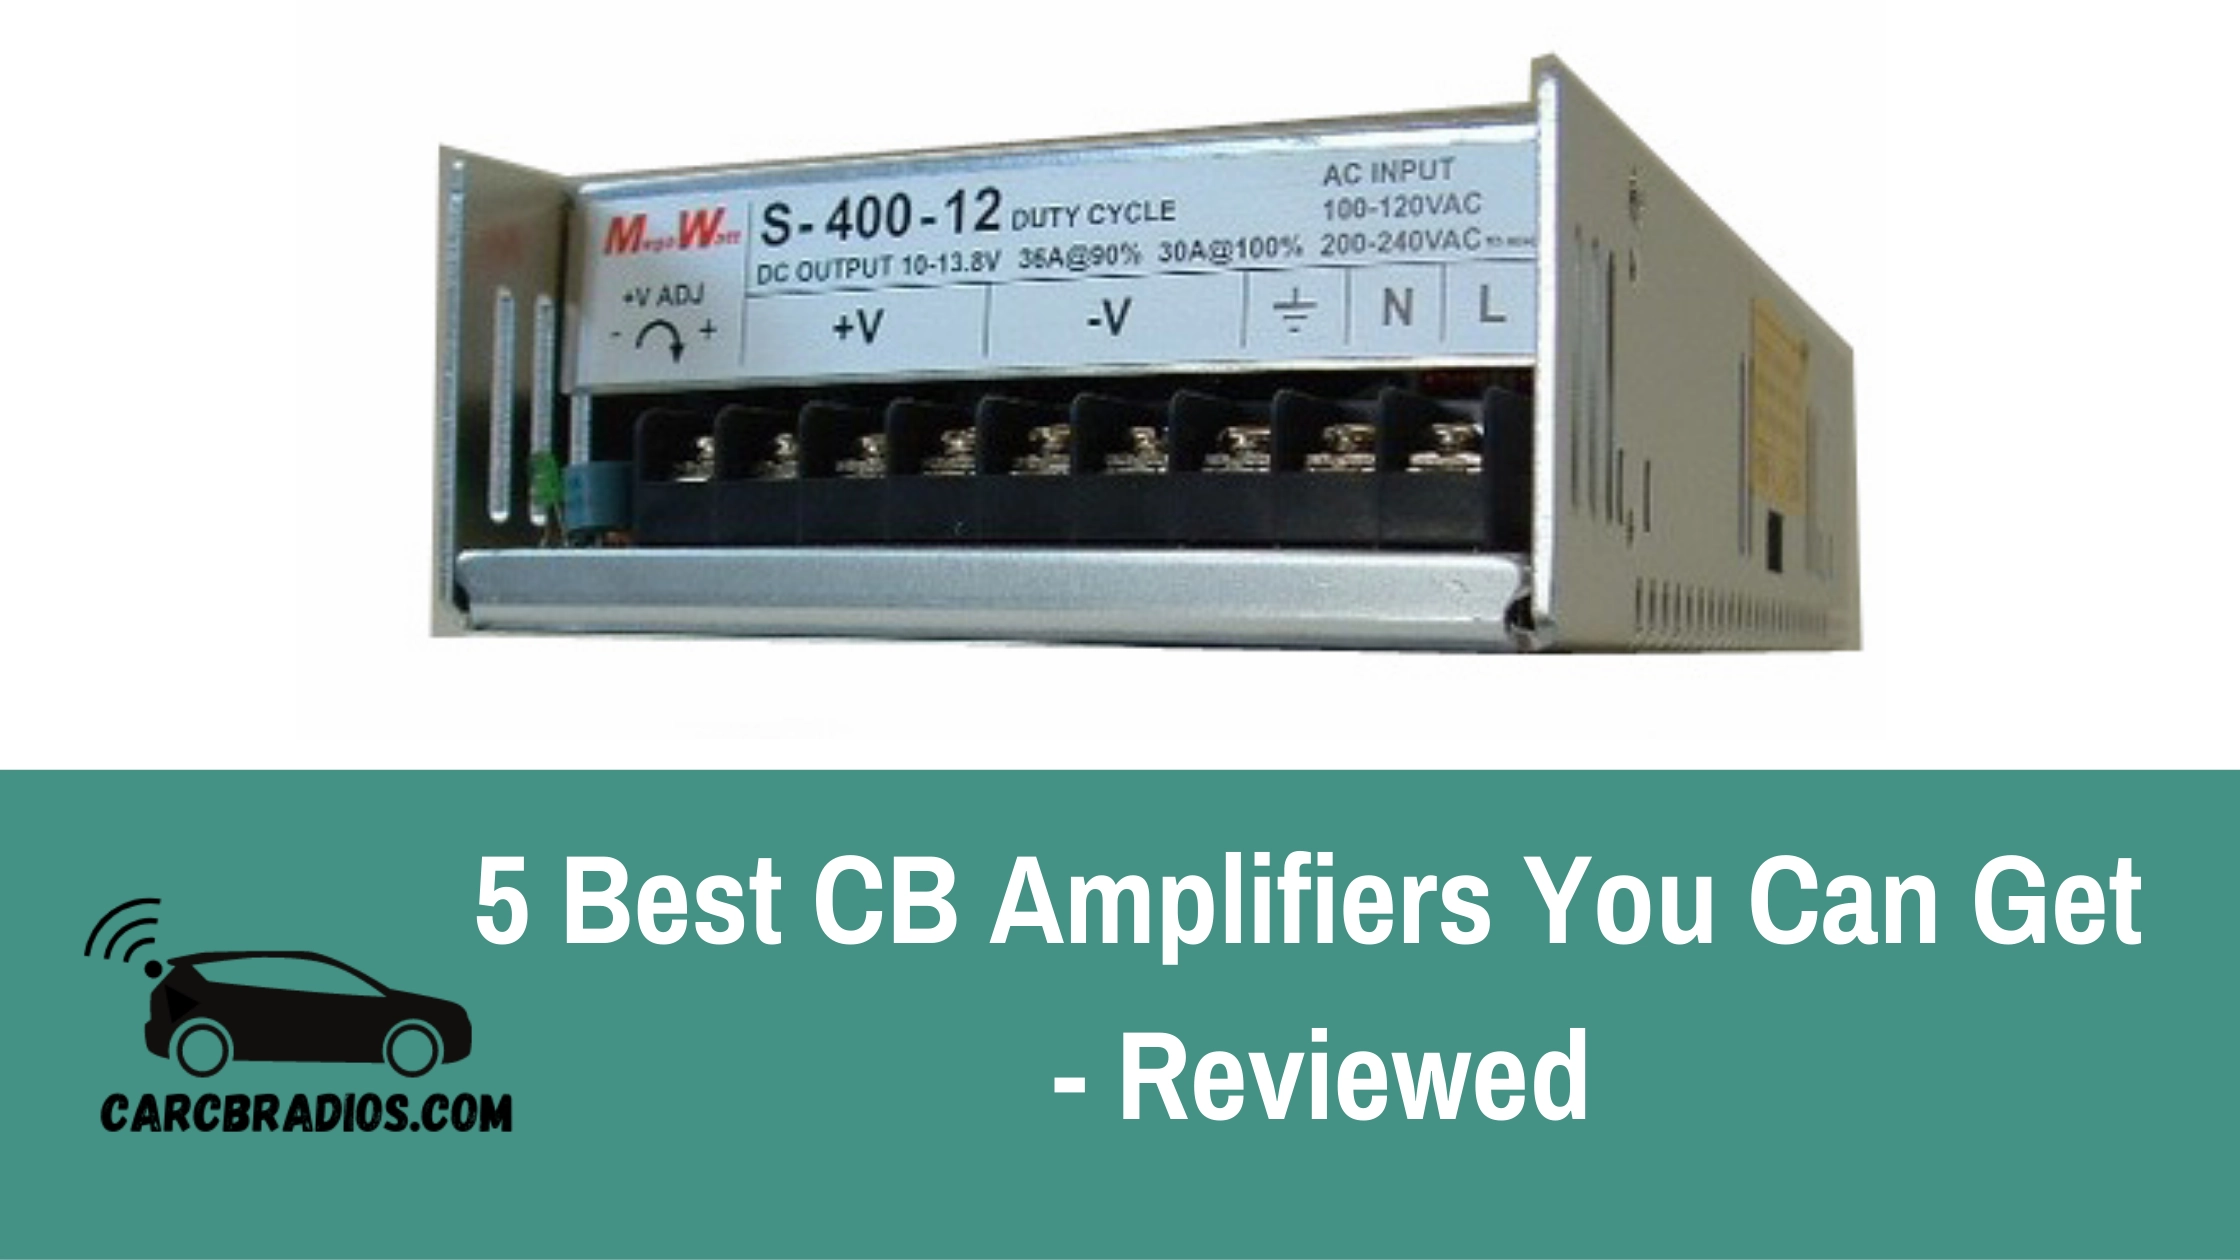 The 5 Best CB Amplifiers You Can Get: you’ve come to the right place; we’re now going to help you with your quest. All you got to do is check out our best CB linear amplifier list.